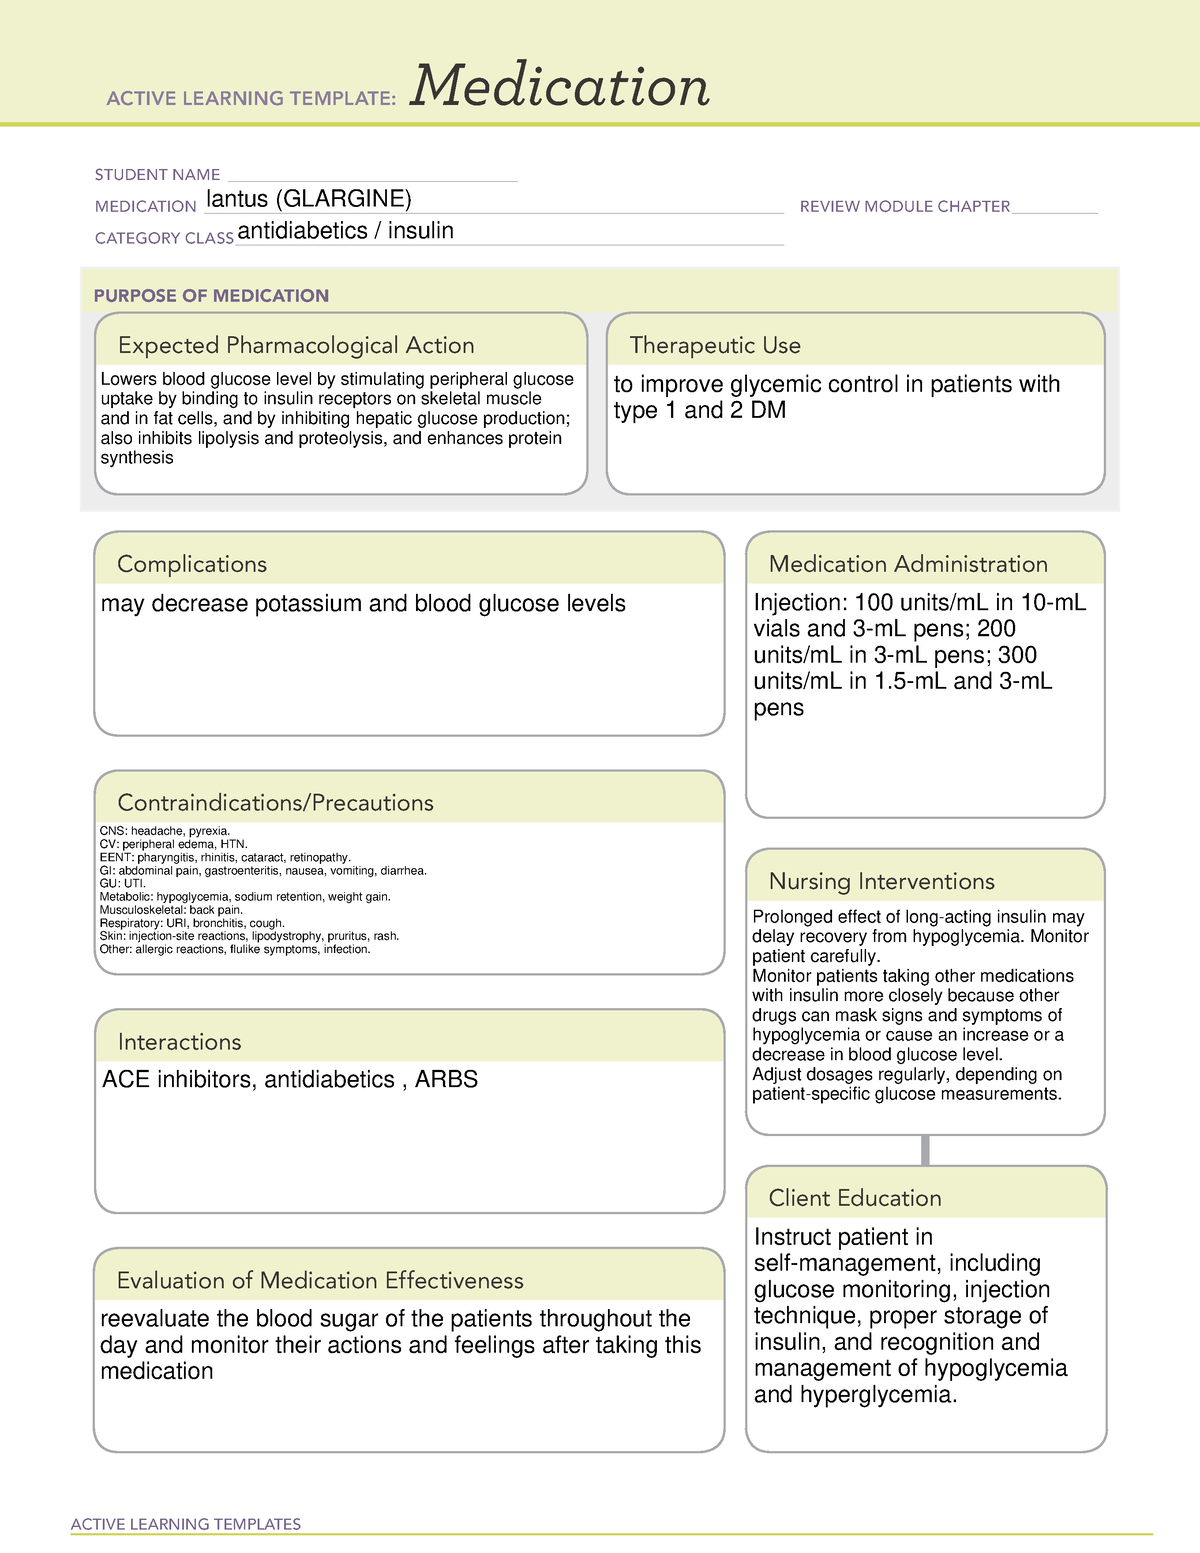 lantus-insulin-medication-study-guides-active-learning-templates